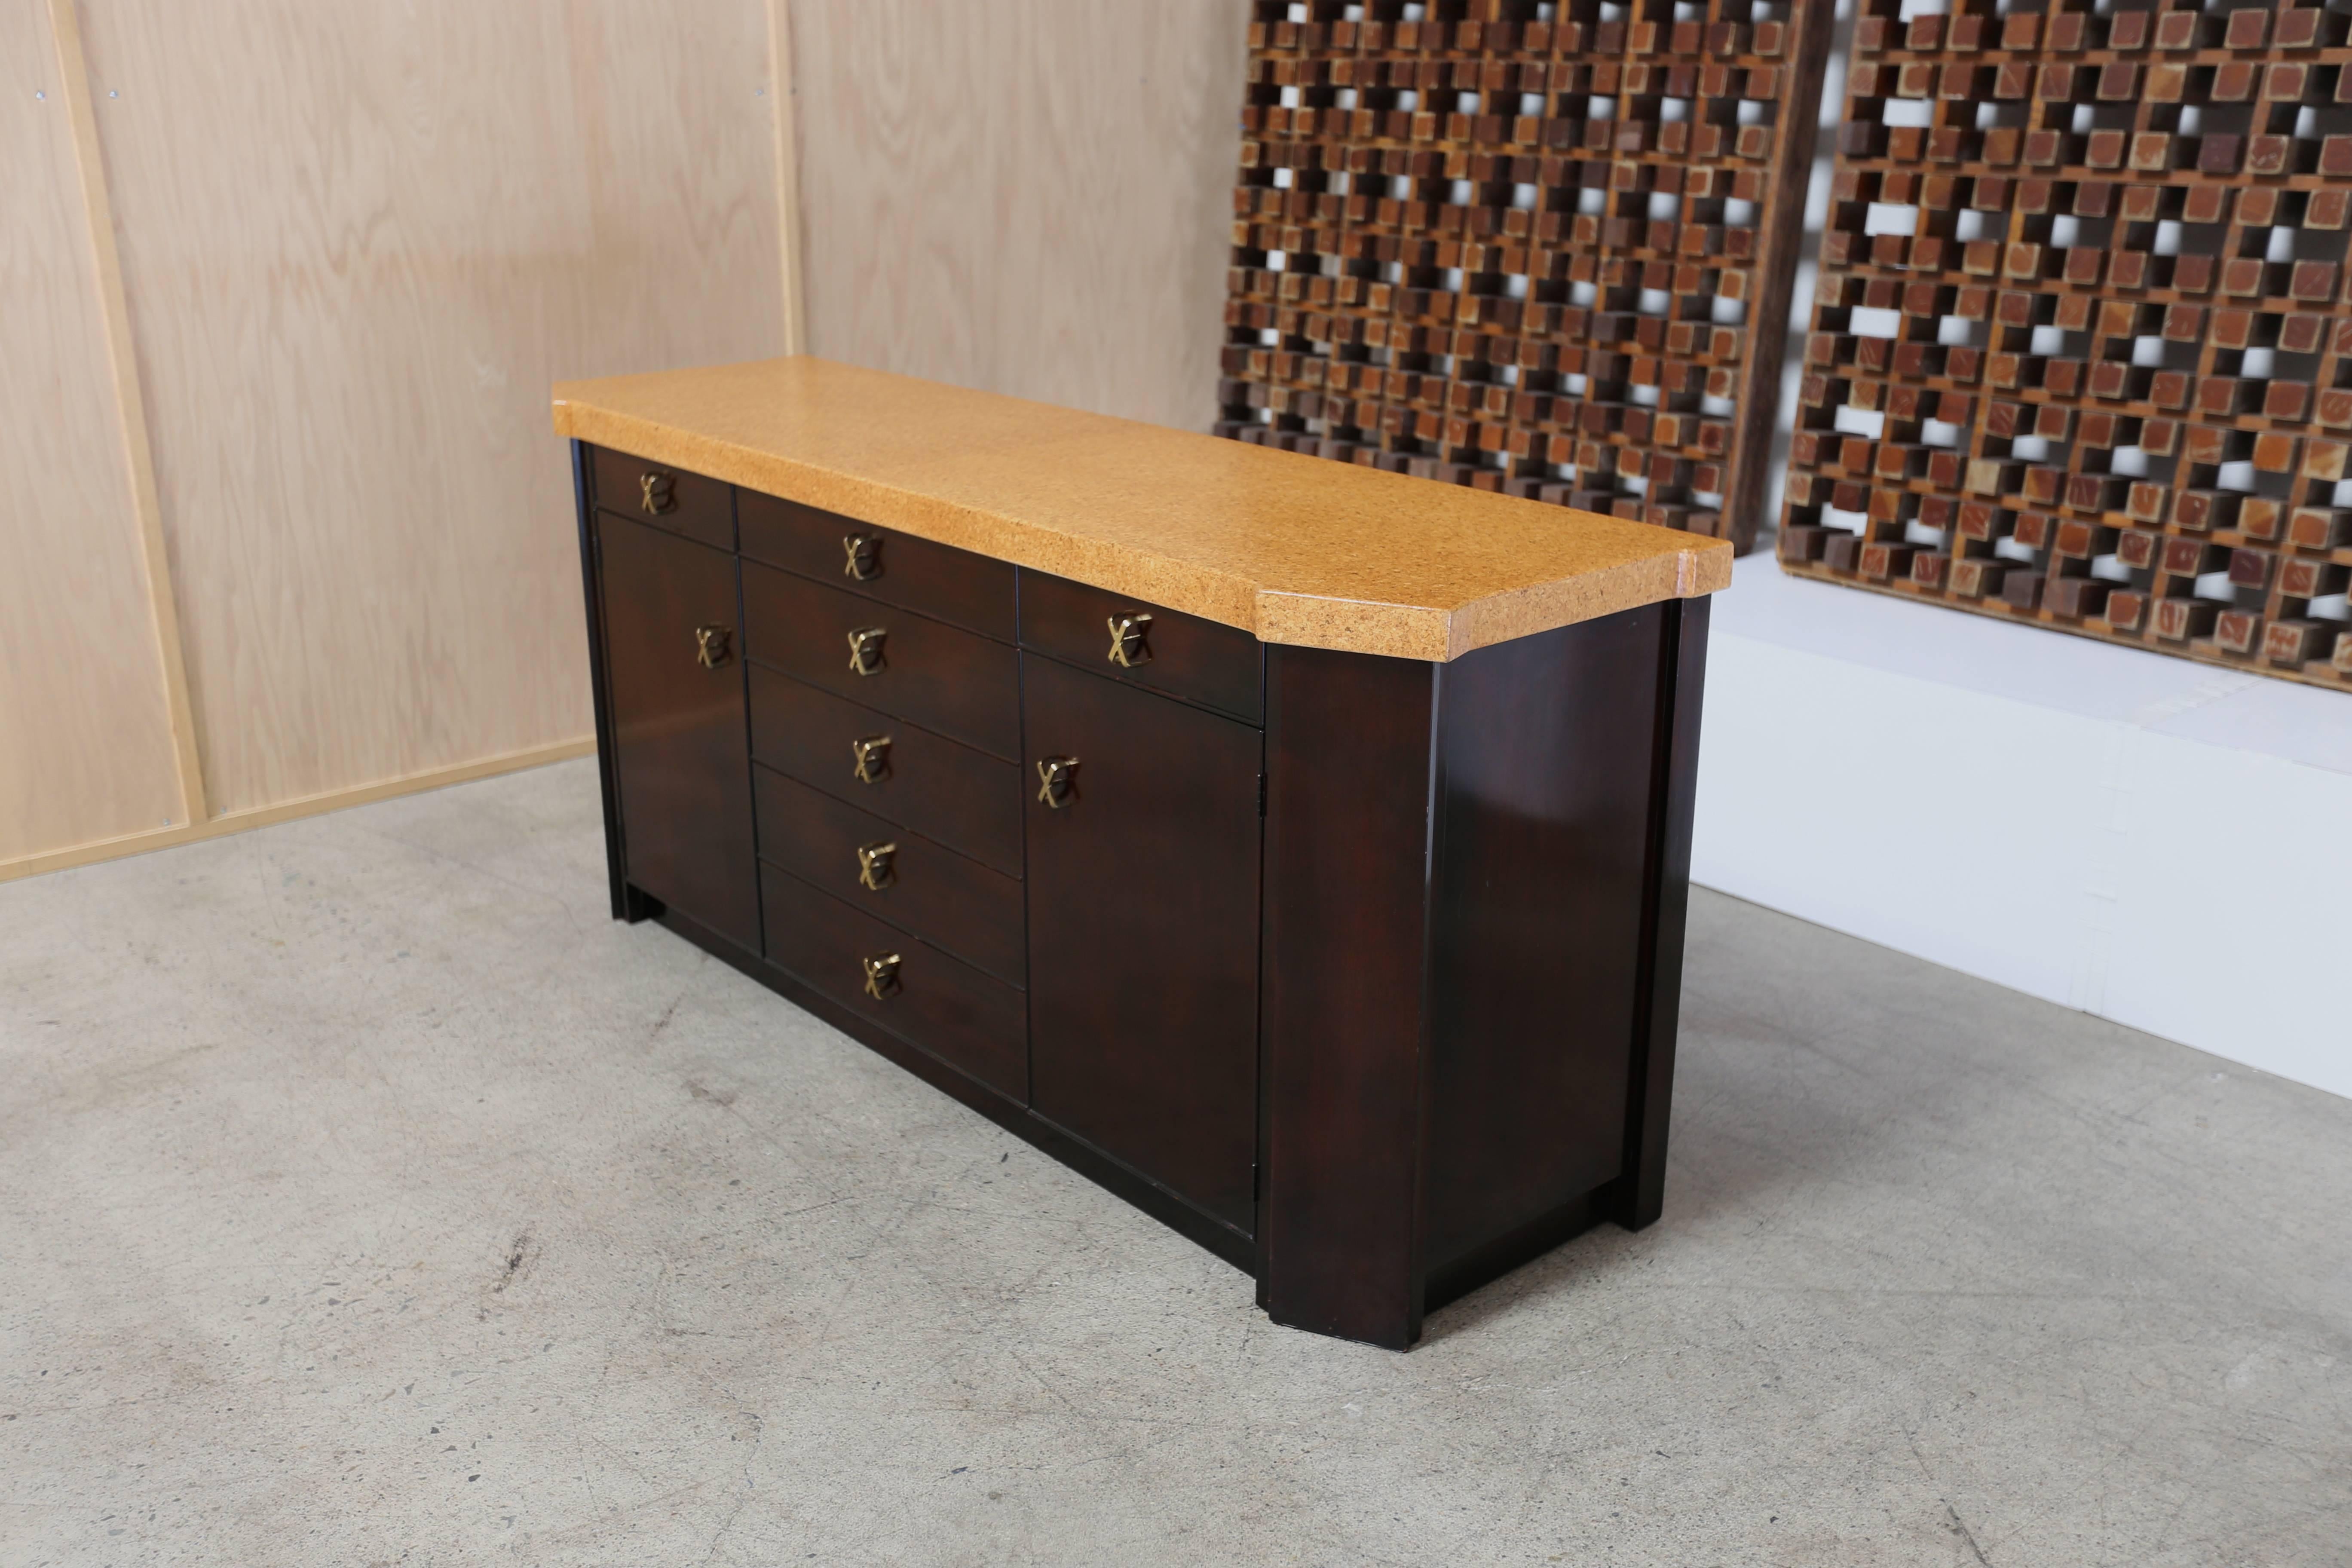 Cork top credenza buffet by Paul Frankl for Johnson Furniture Company.